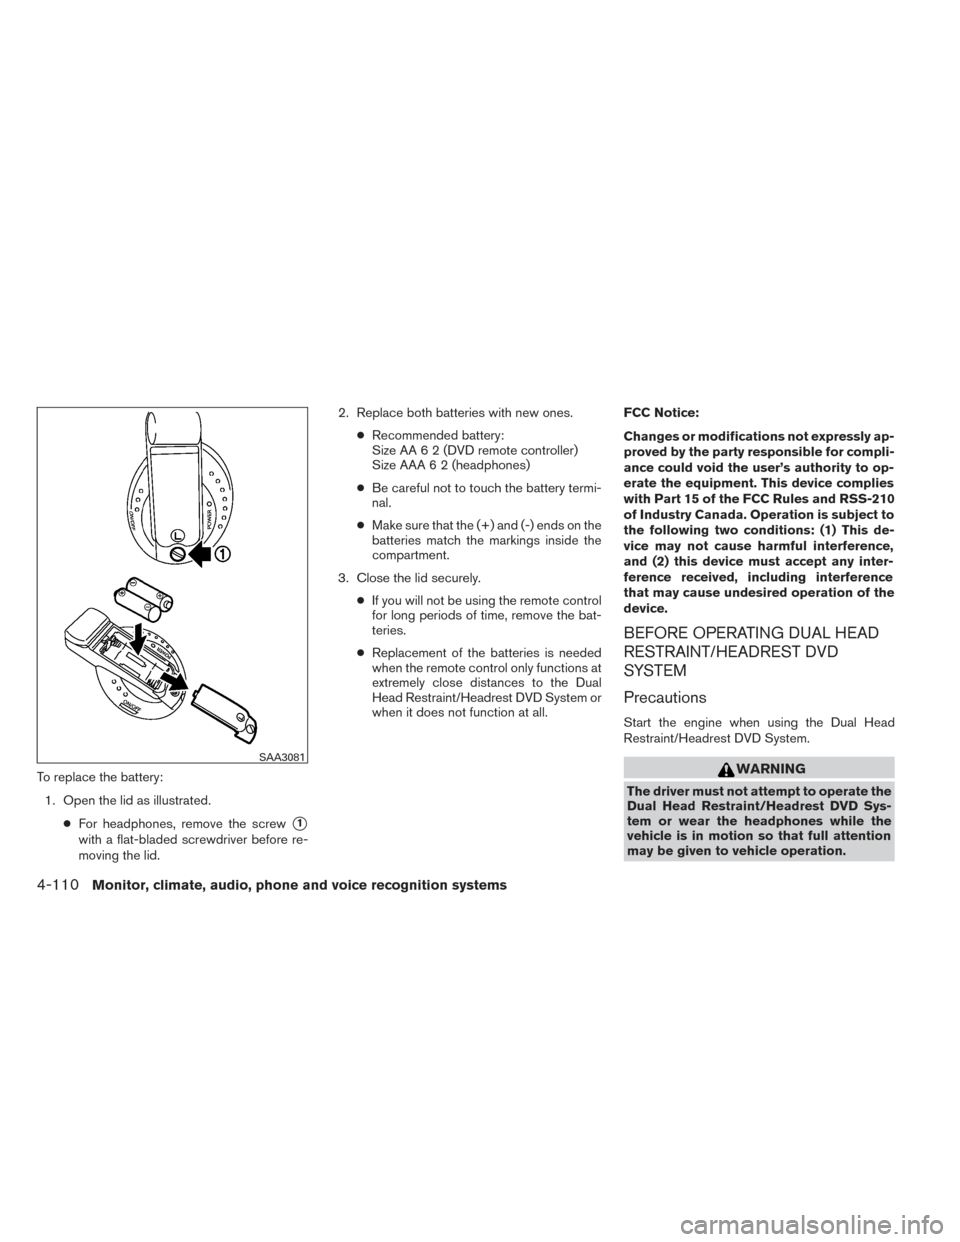 NISSAN PATHFINDER 2014 R52 / 4.G Service Manual To replace the battery:1. Open the lid as illustrated. ●For headphones, remove the screw
1
with a flat-bladed screwdriver before re-
moving the lid. 2. Replace both batteries with new ones.
●Reco